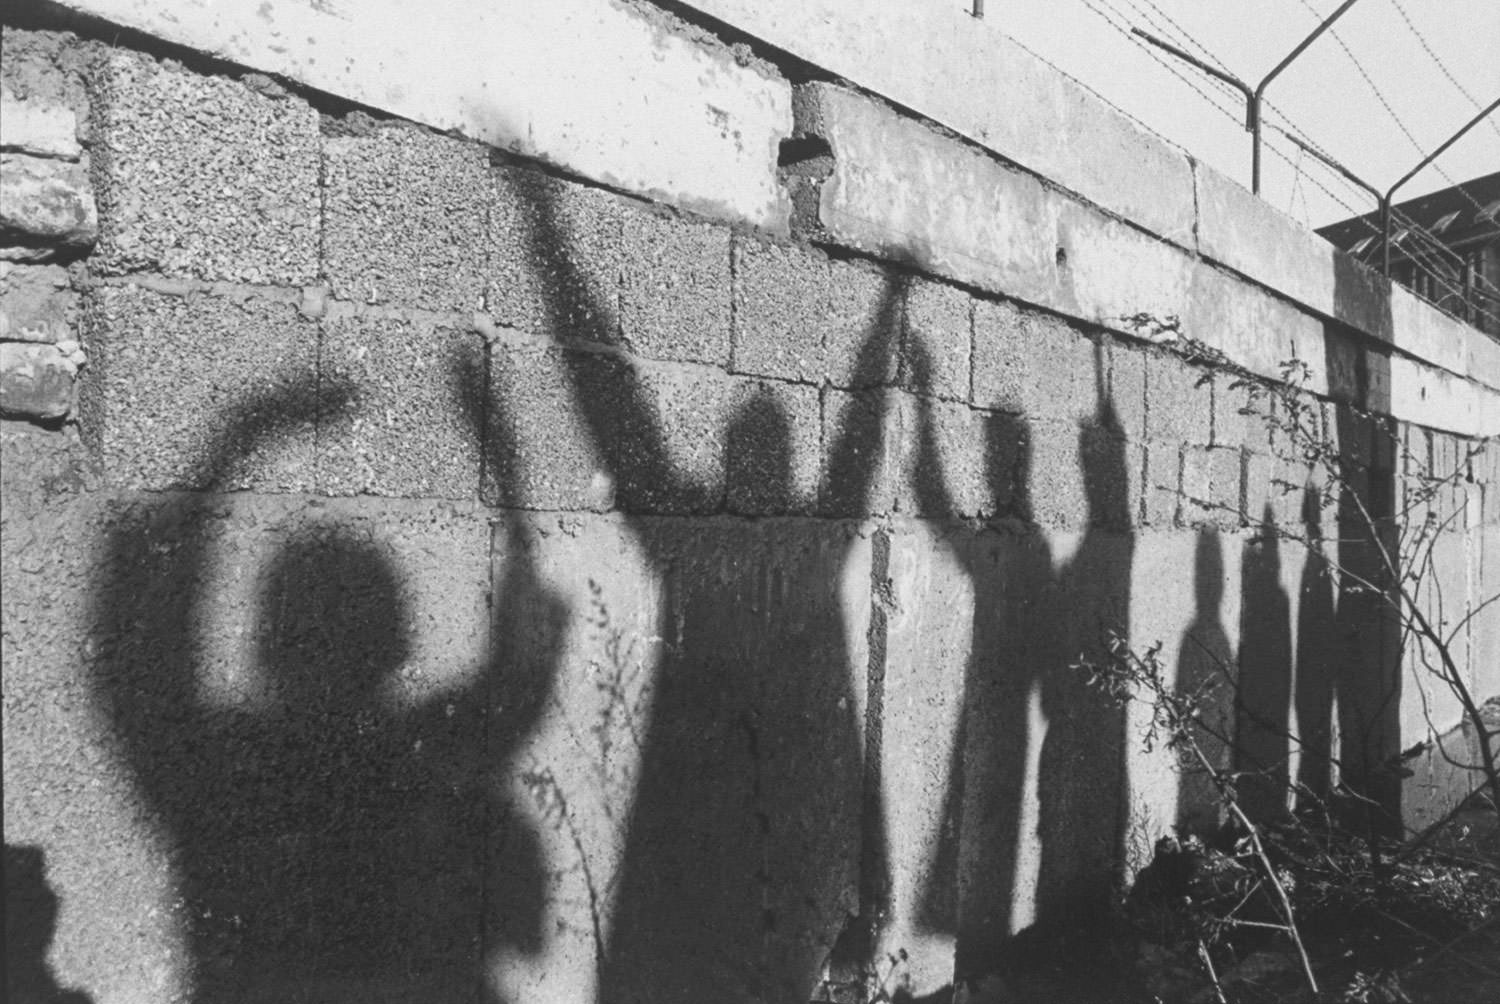 The Berlin Wall bears the shadowy silhouettes of West Berliners waving to their relatives on the unseen, Eastern side of the Wall in December 1962.